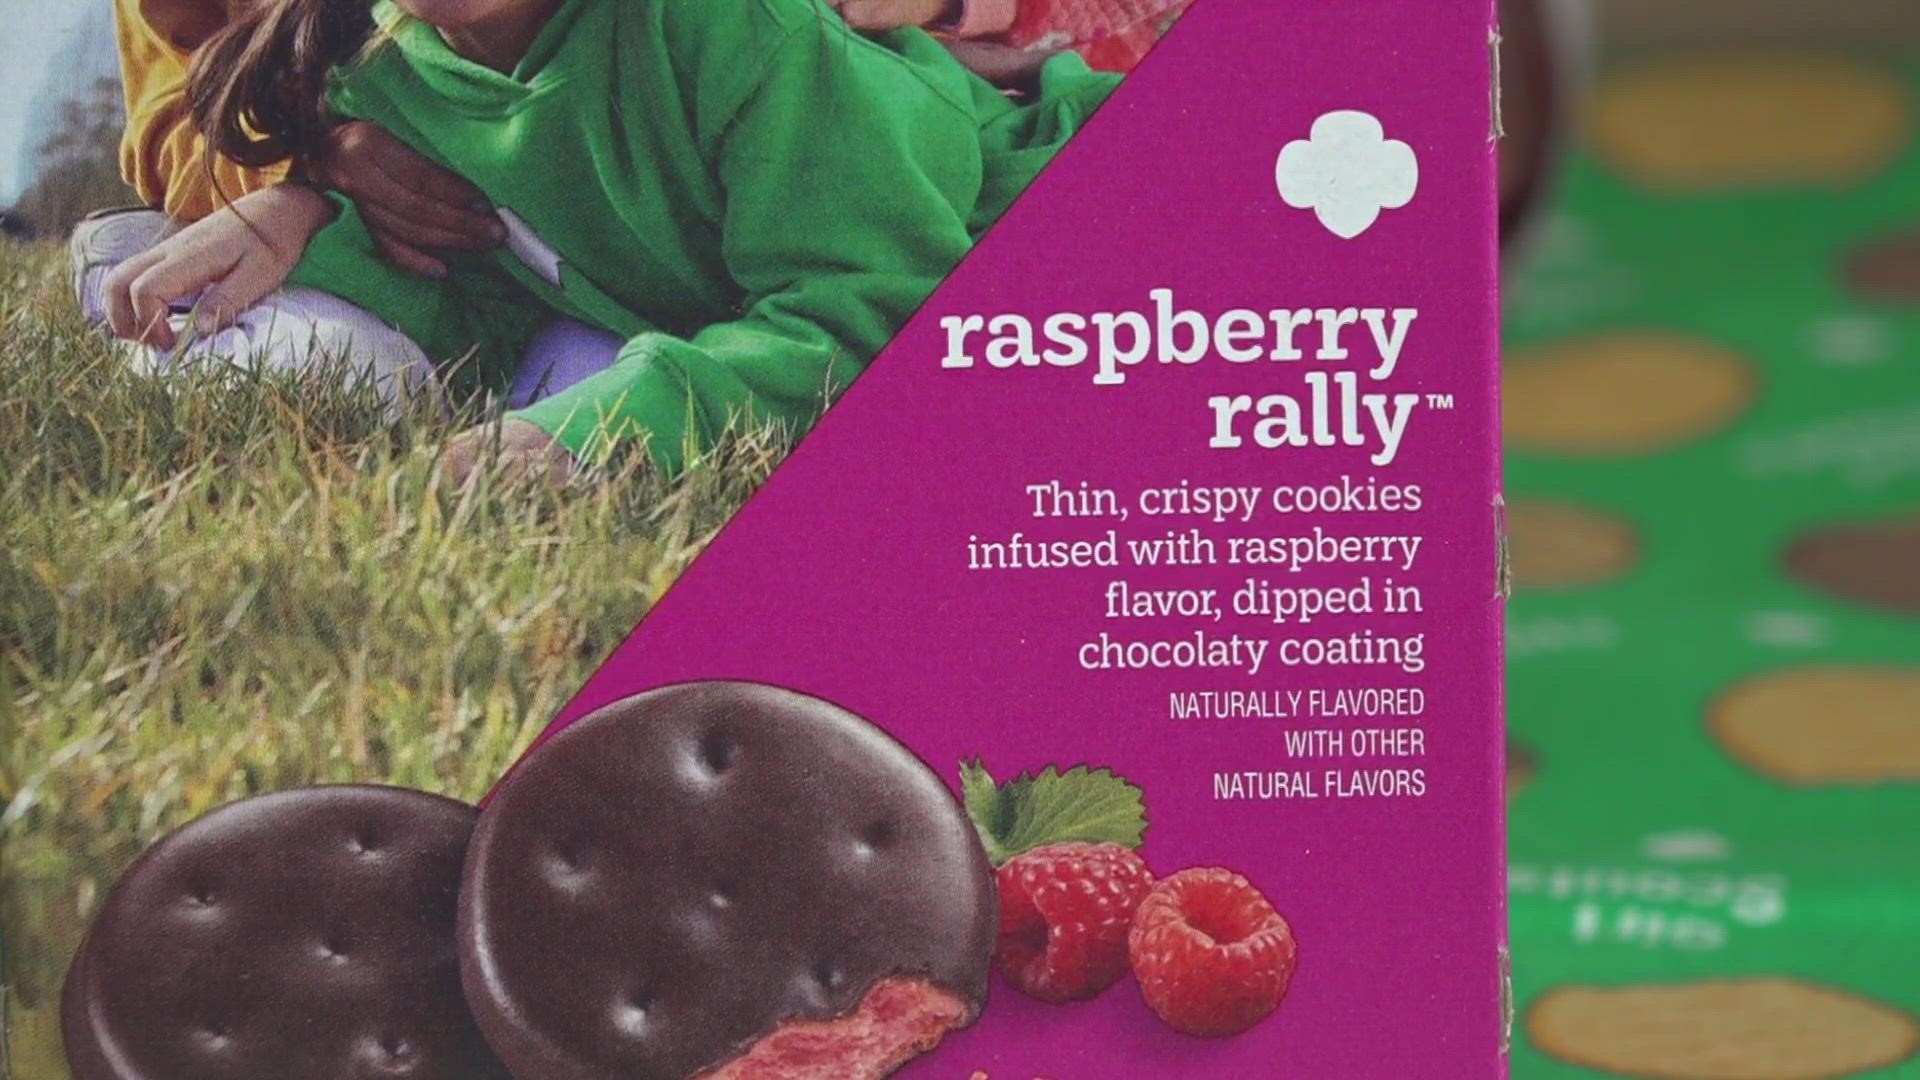 This year, for the first time, Girl Scouts created a new cookie, the “Raspberry Rally” that would only be sold online and with a limited quantity.